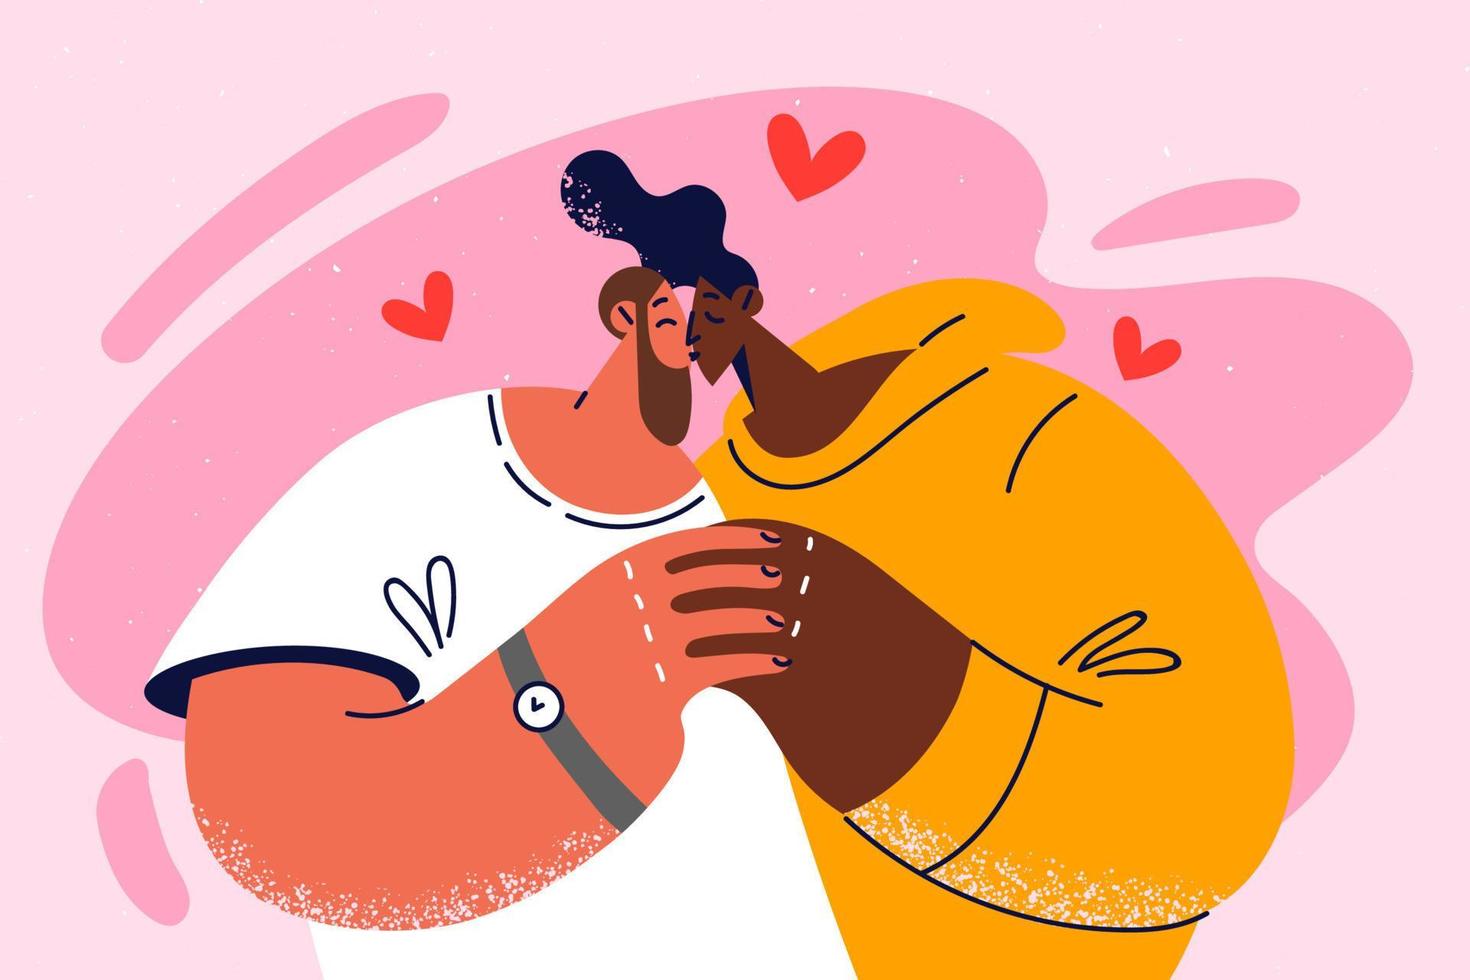 Happy interracial couple kissing enjoying romantic relationships. Smiling multiethnic man and woman hug show affection and love. Vector illustration.